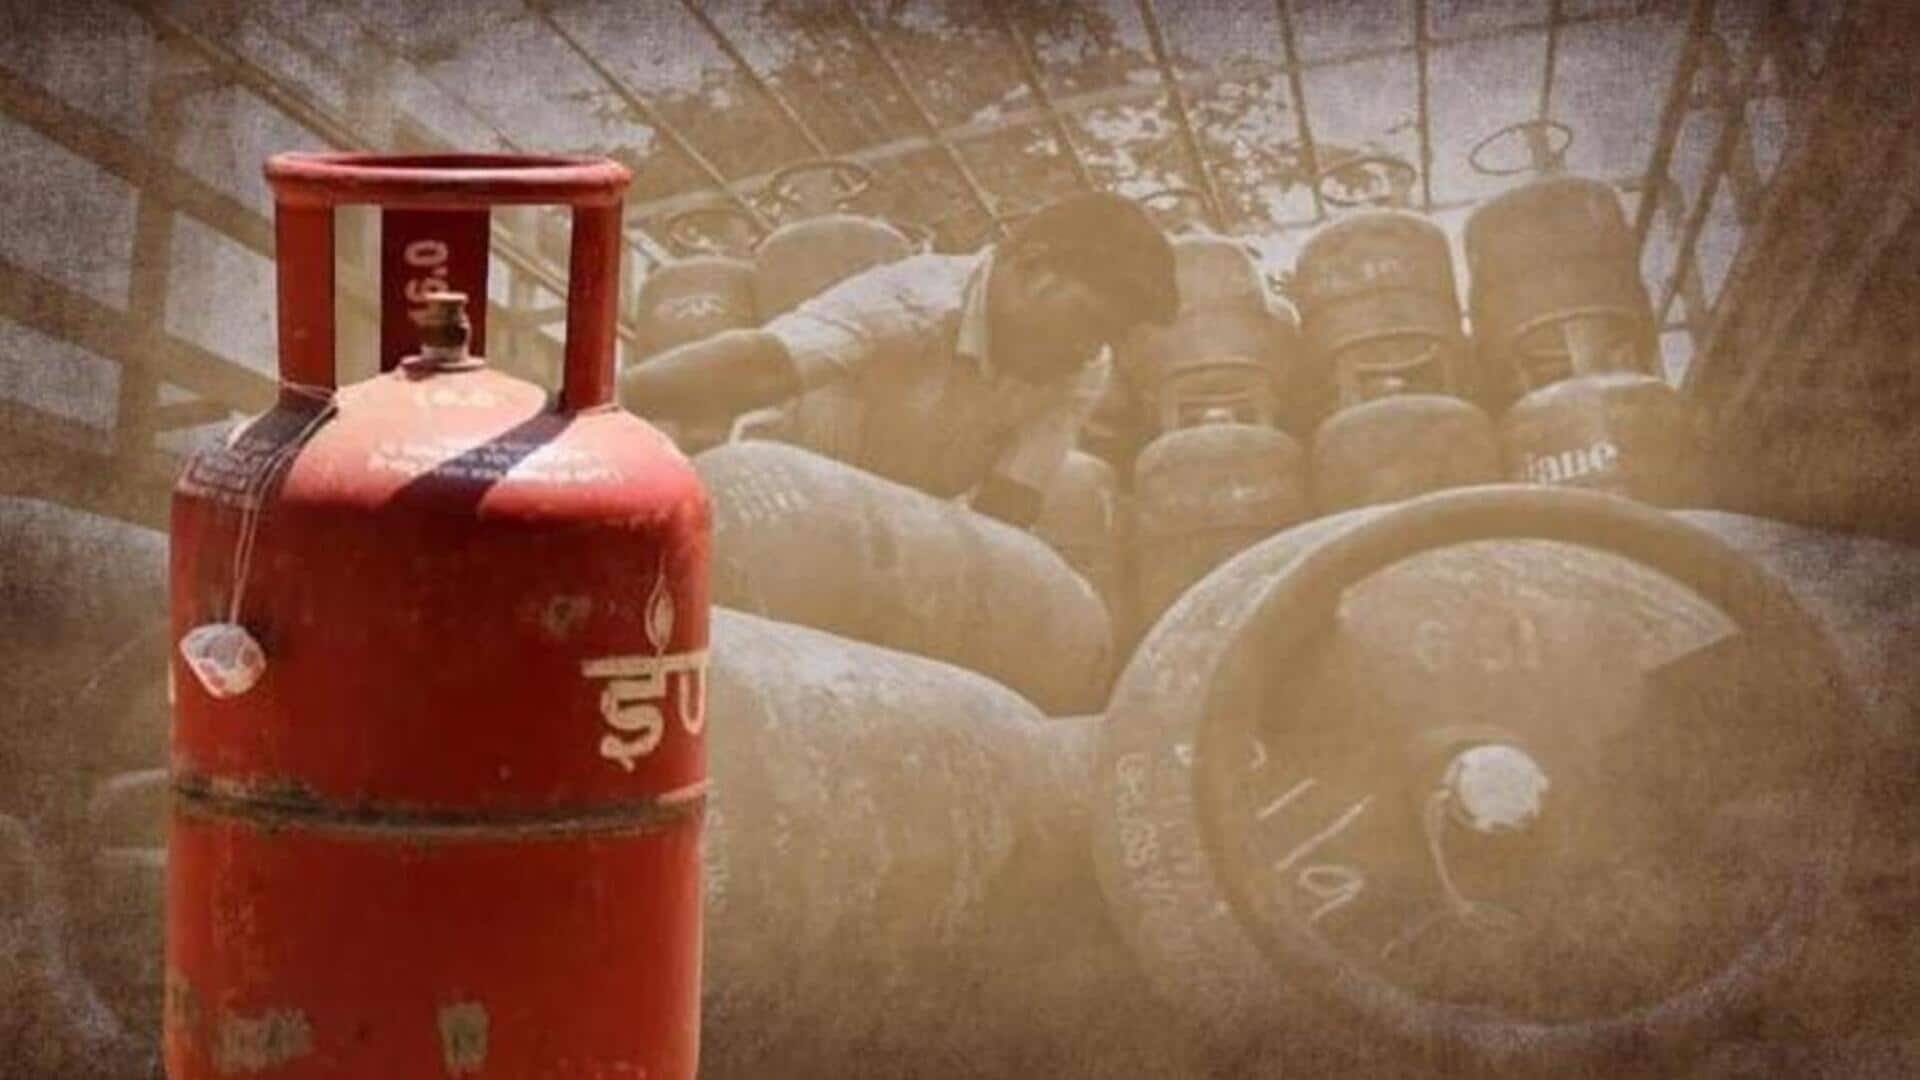 19kg commercial LPG cylinder gets costlier by Rs. 21